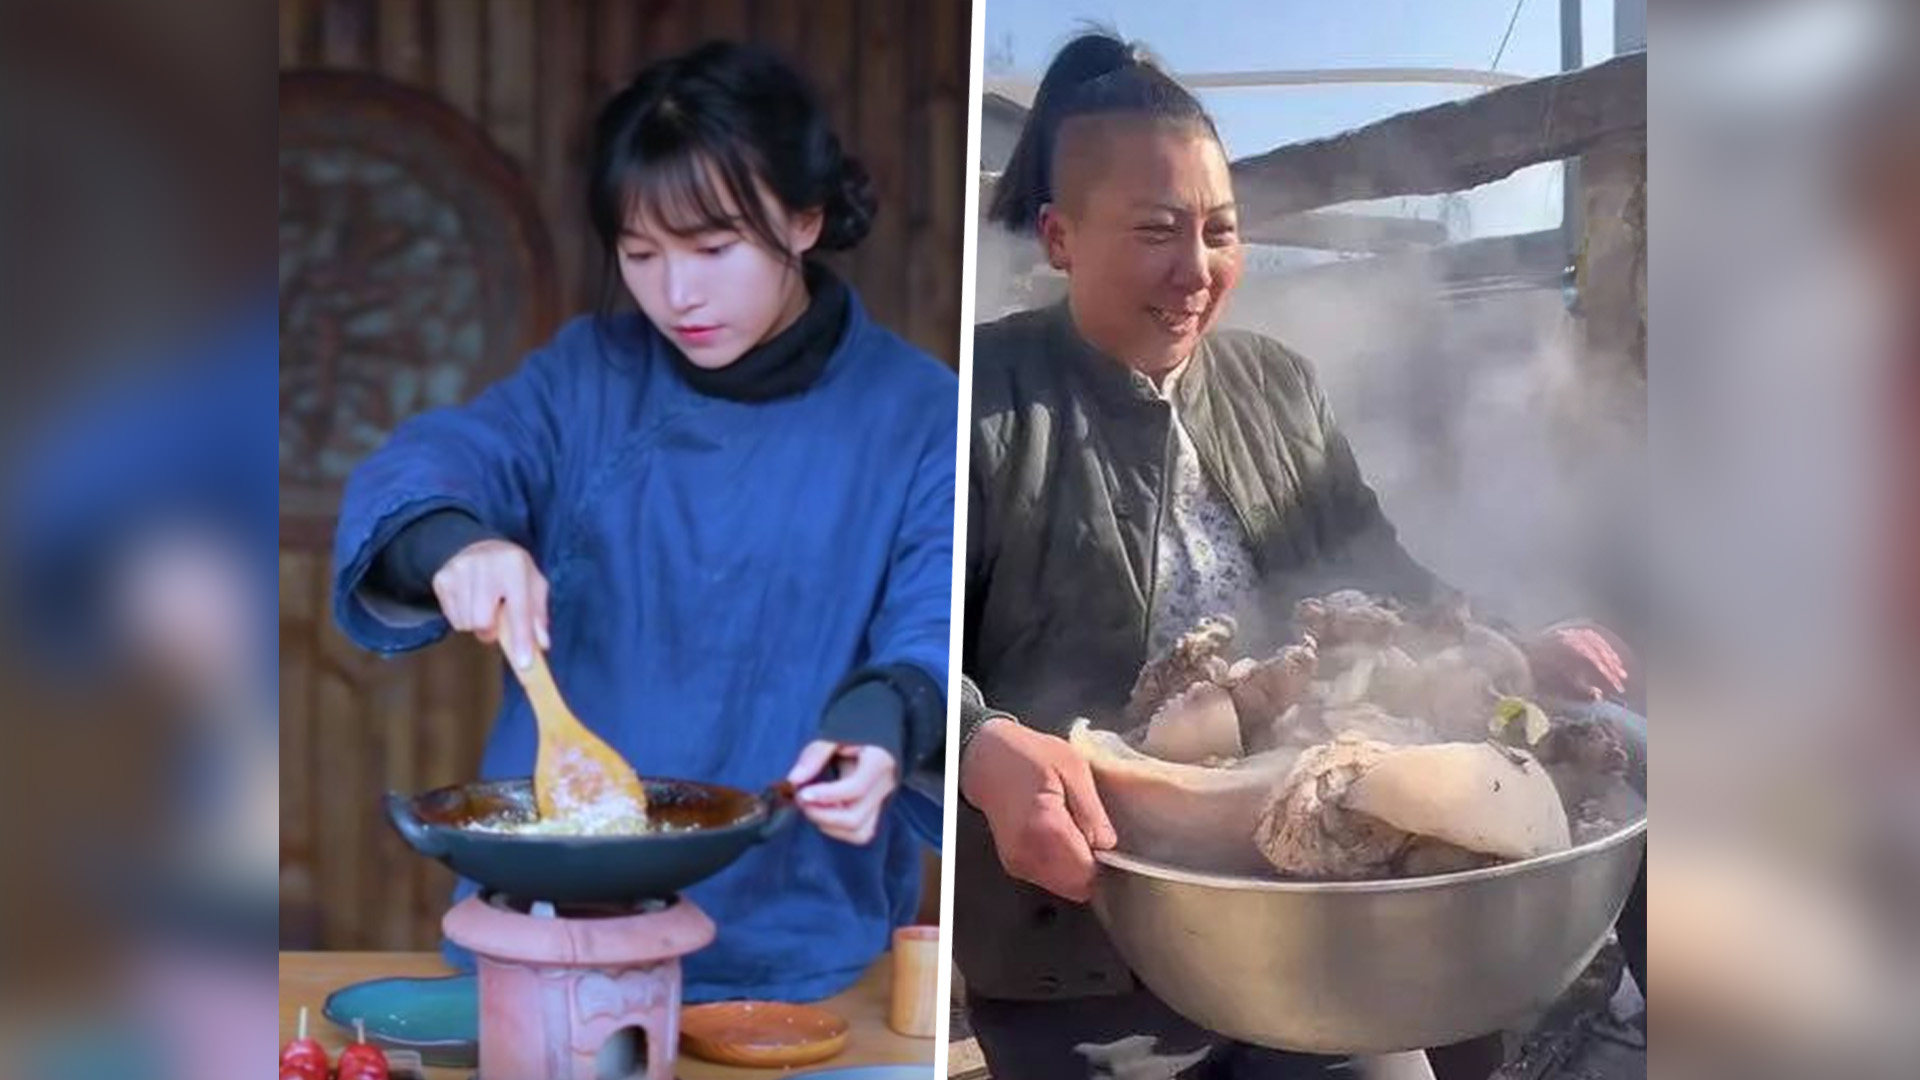 An unlikely middle-aged woman, whose rise to become one of China’s top online influencers has been built on her experiences in one of the mainland’s most harsh rural environments, is known by her vast army of fans as simply “Sister Yu”. Photo: SCMP composite/Weibo/The Paper
